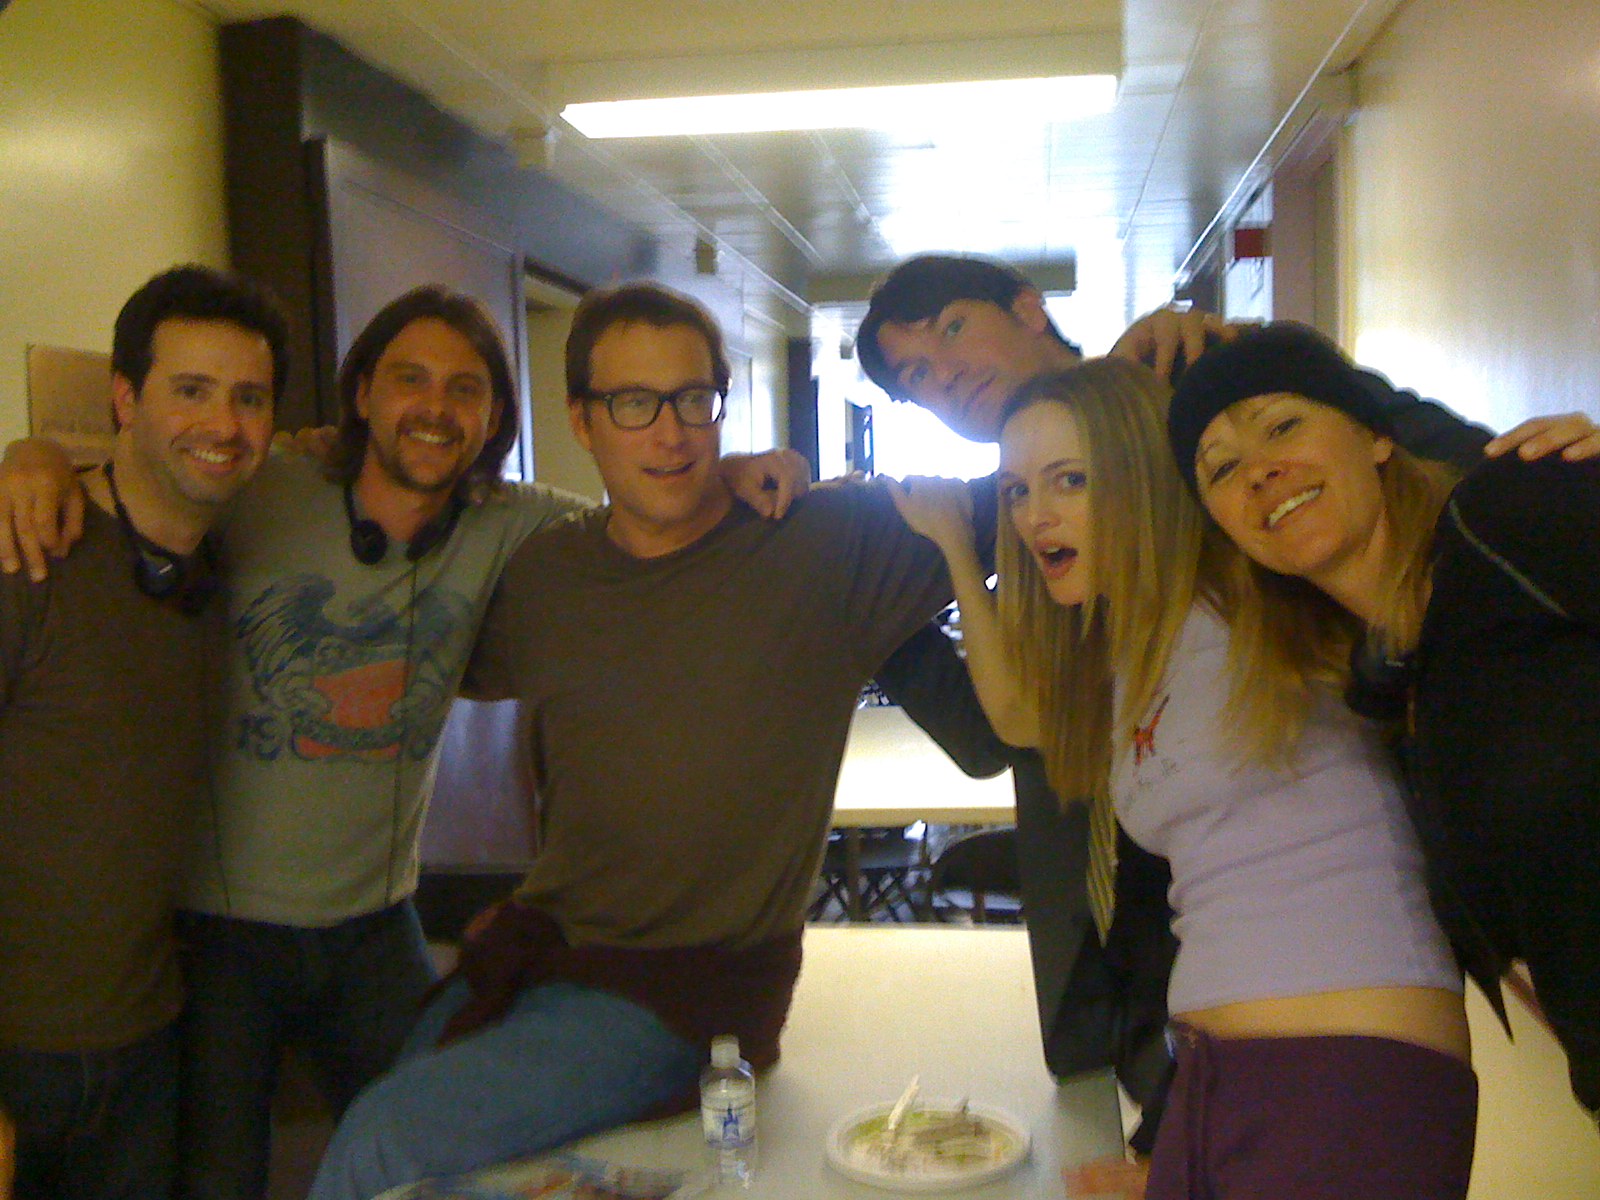 On the set of 'Baby on Board' with director Brian Herzlinger and cast John Corbett, Jerry O'Connell and Heather Graham.